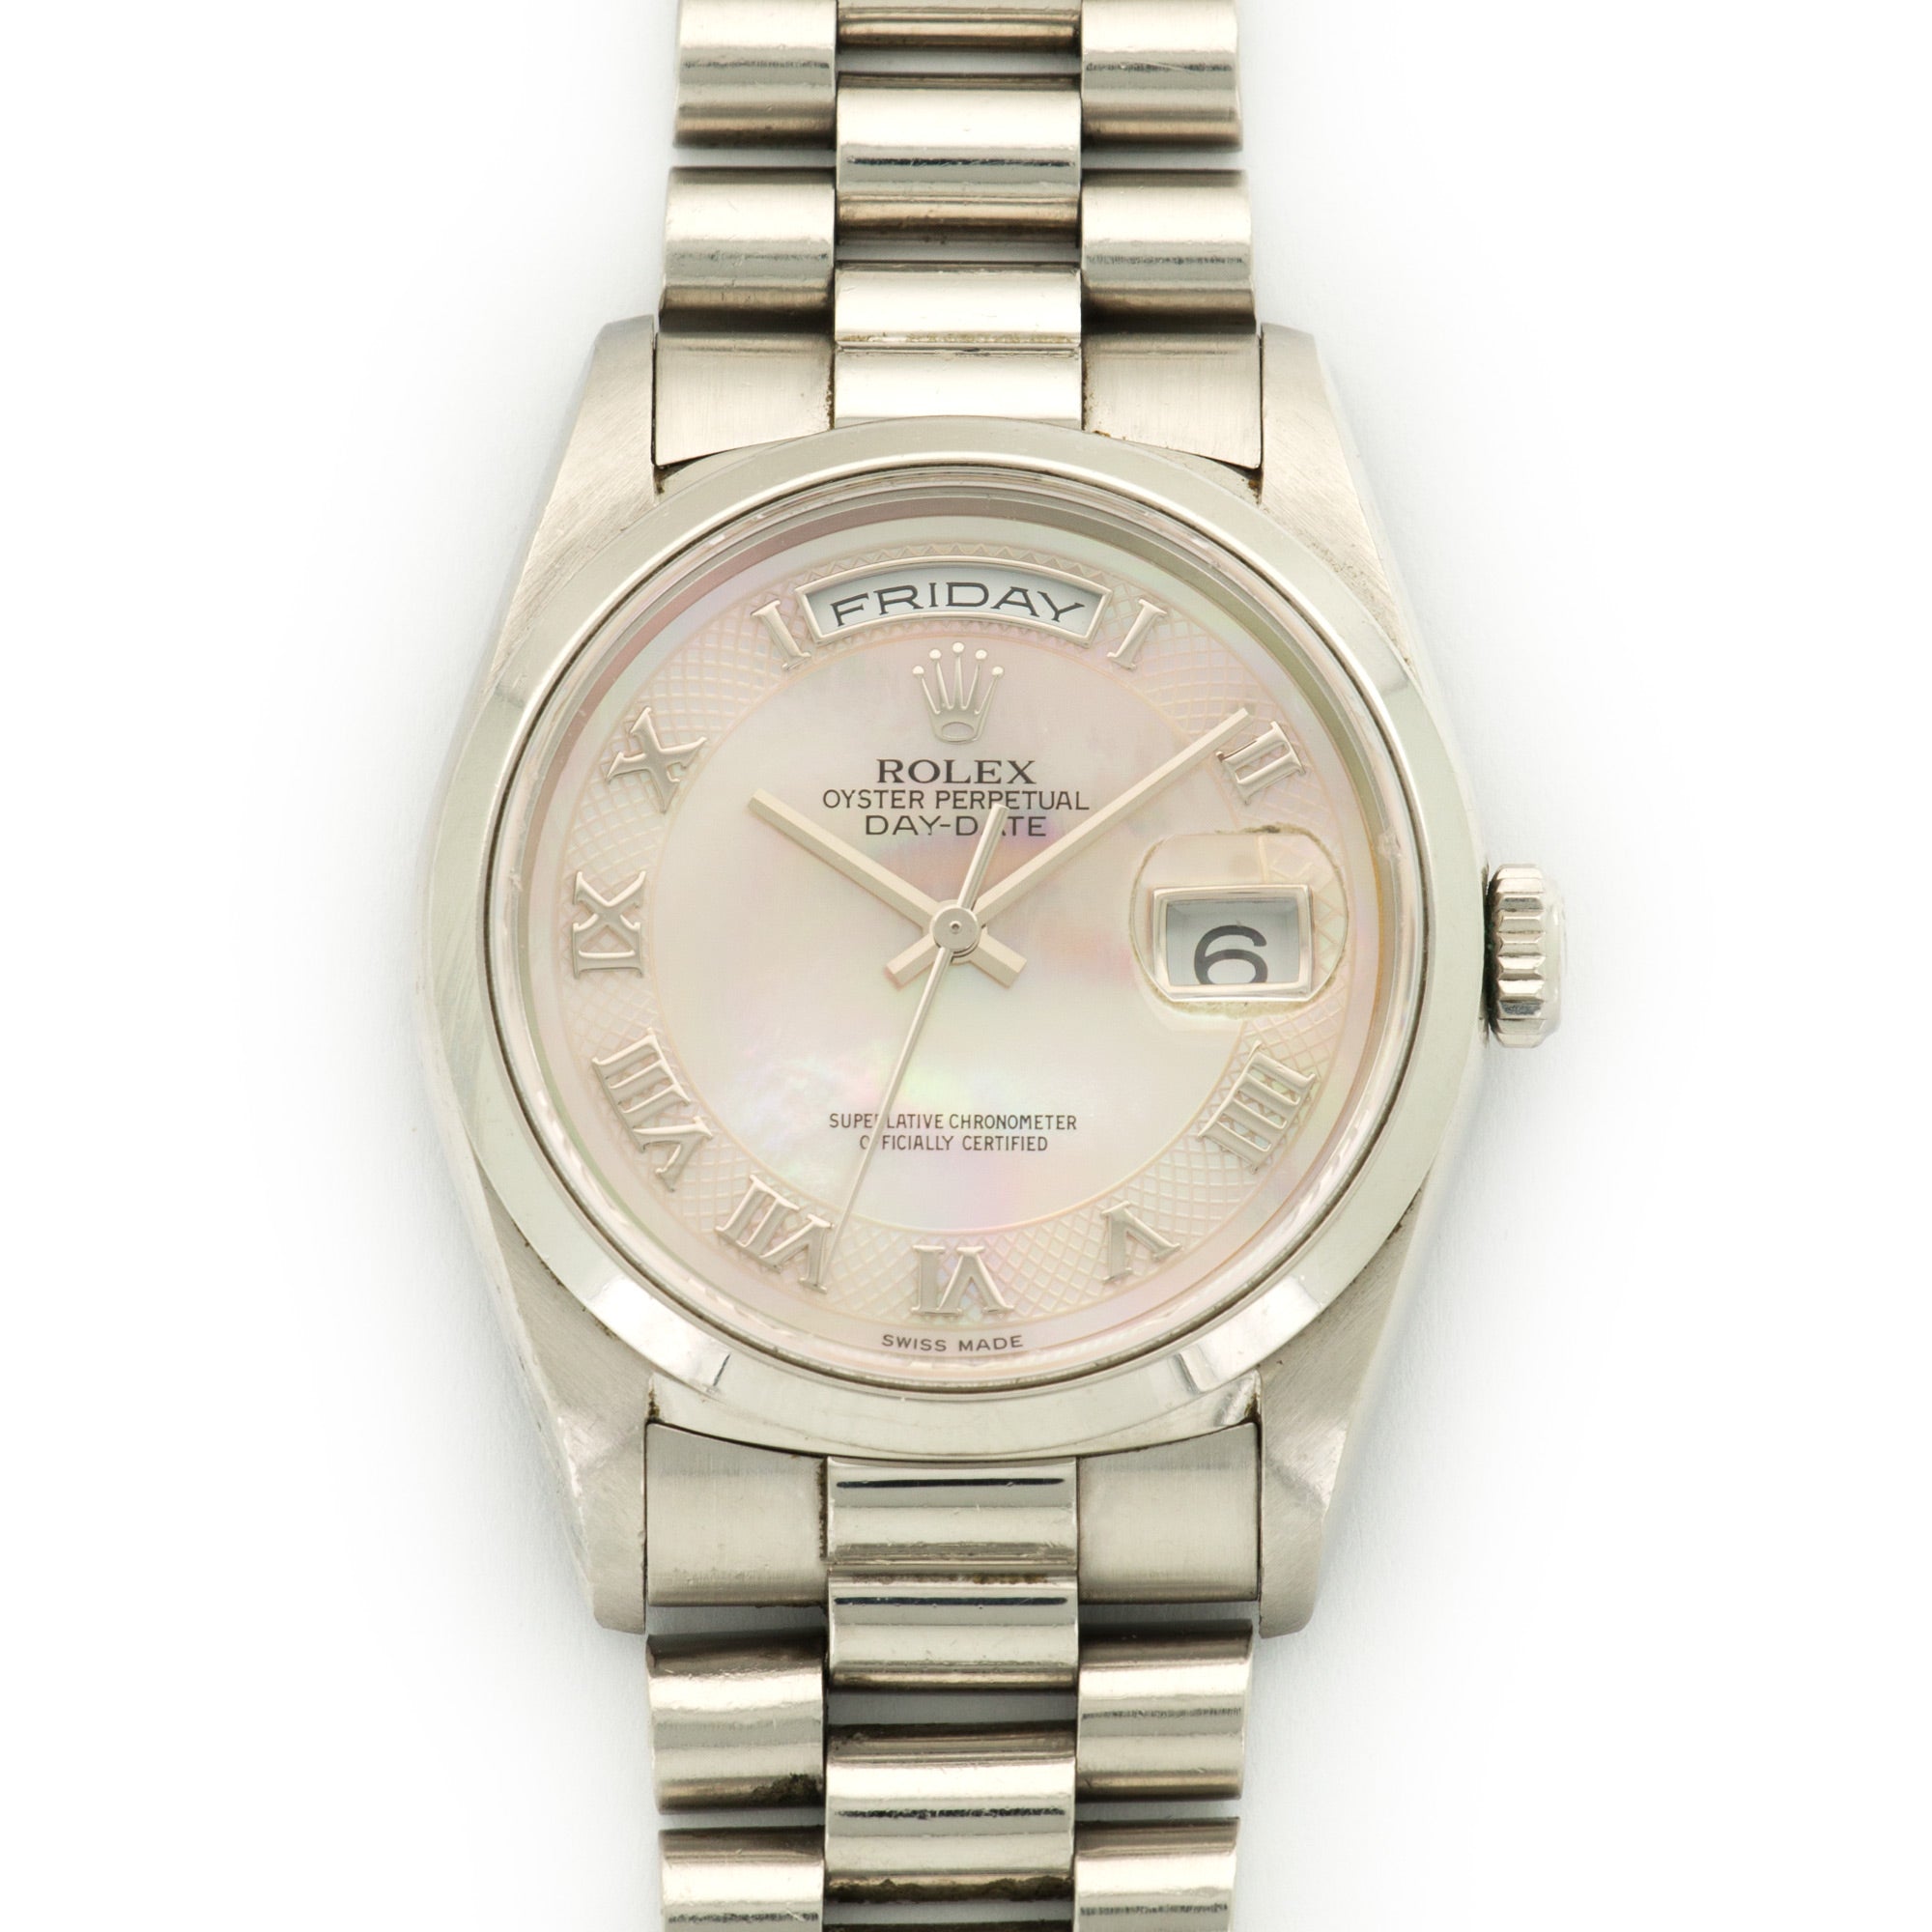 Rolex - Rolex Platinum Day-Date Mother of Pearl Watch Ref. 18206 - The Keystone Watches